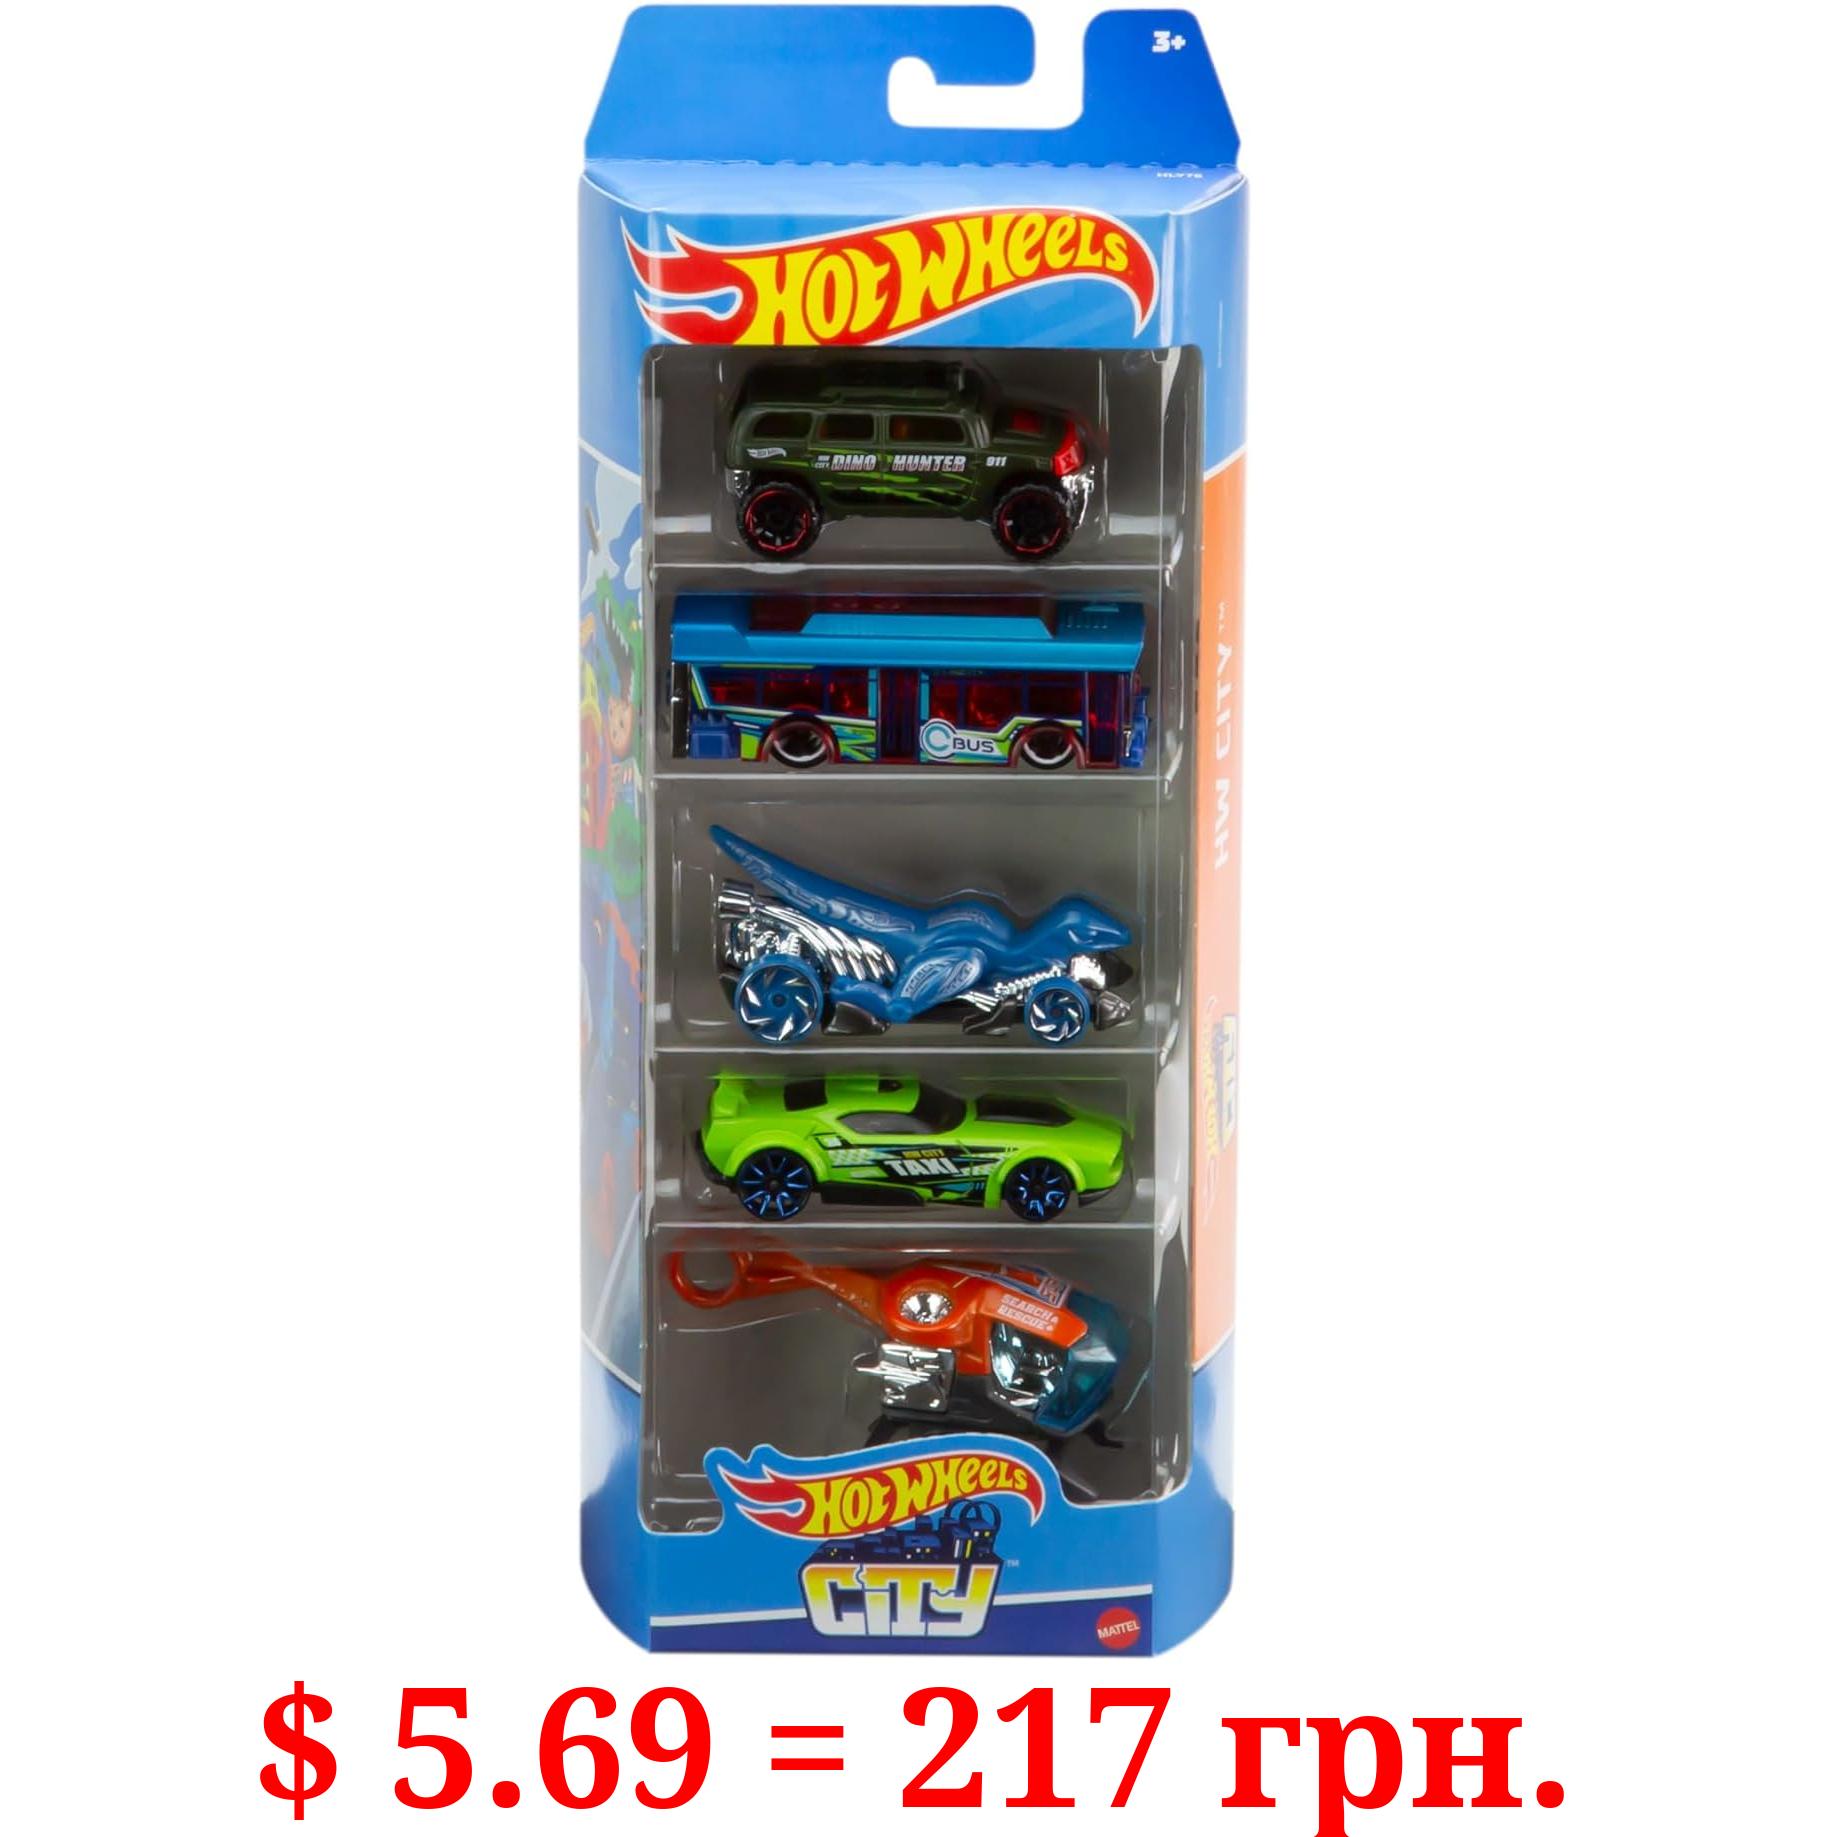 Hot Wheels 5-Car Pack of 1:64 Scale Vehicles, Gift for Collectors & Kids Ages 3 Years Old & Up